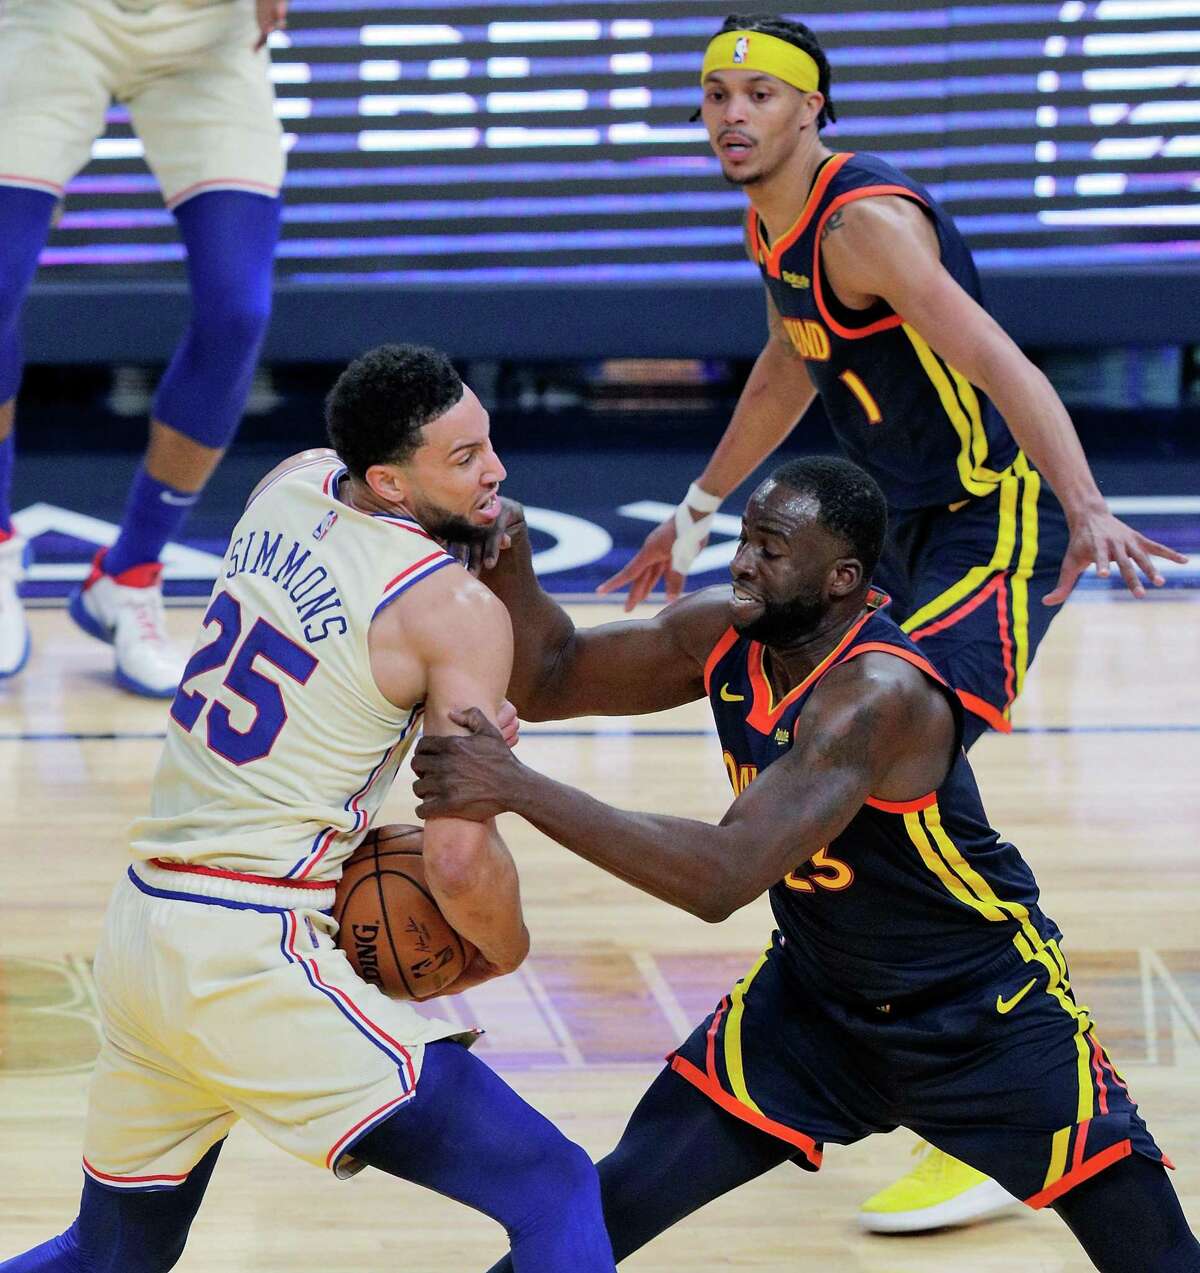 What Makes Ben Simmons 'Invaluable' To The Philadelphia 76ers